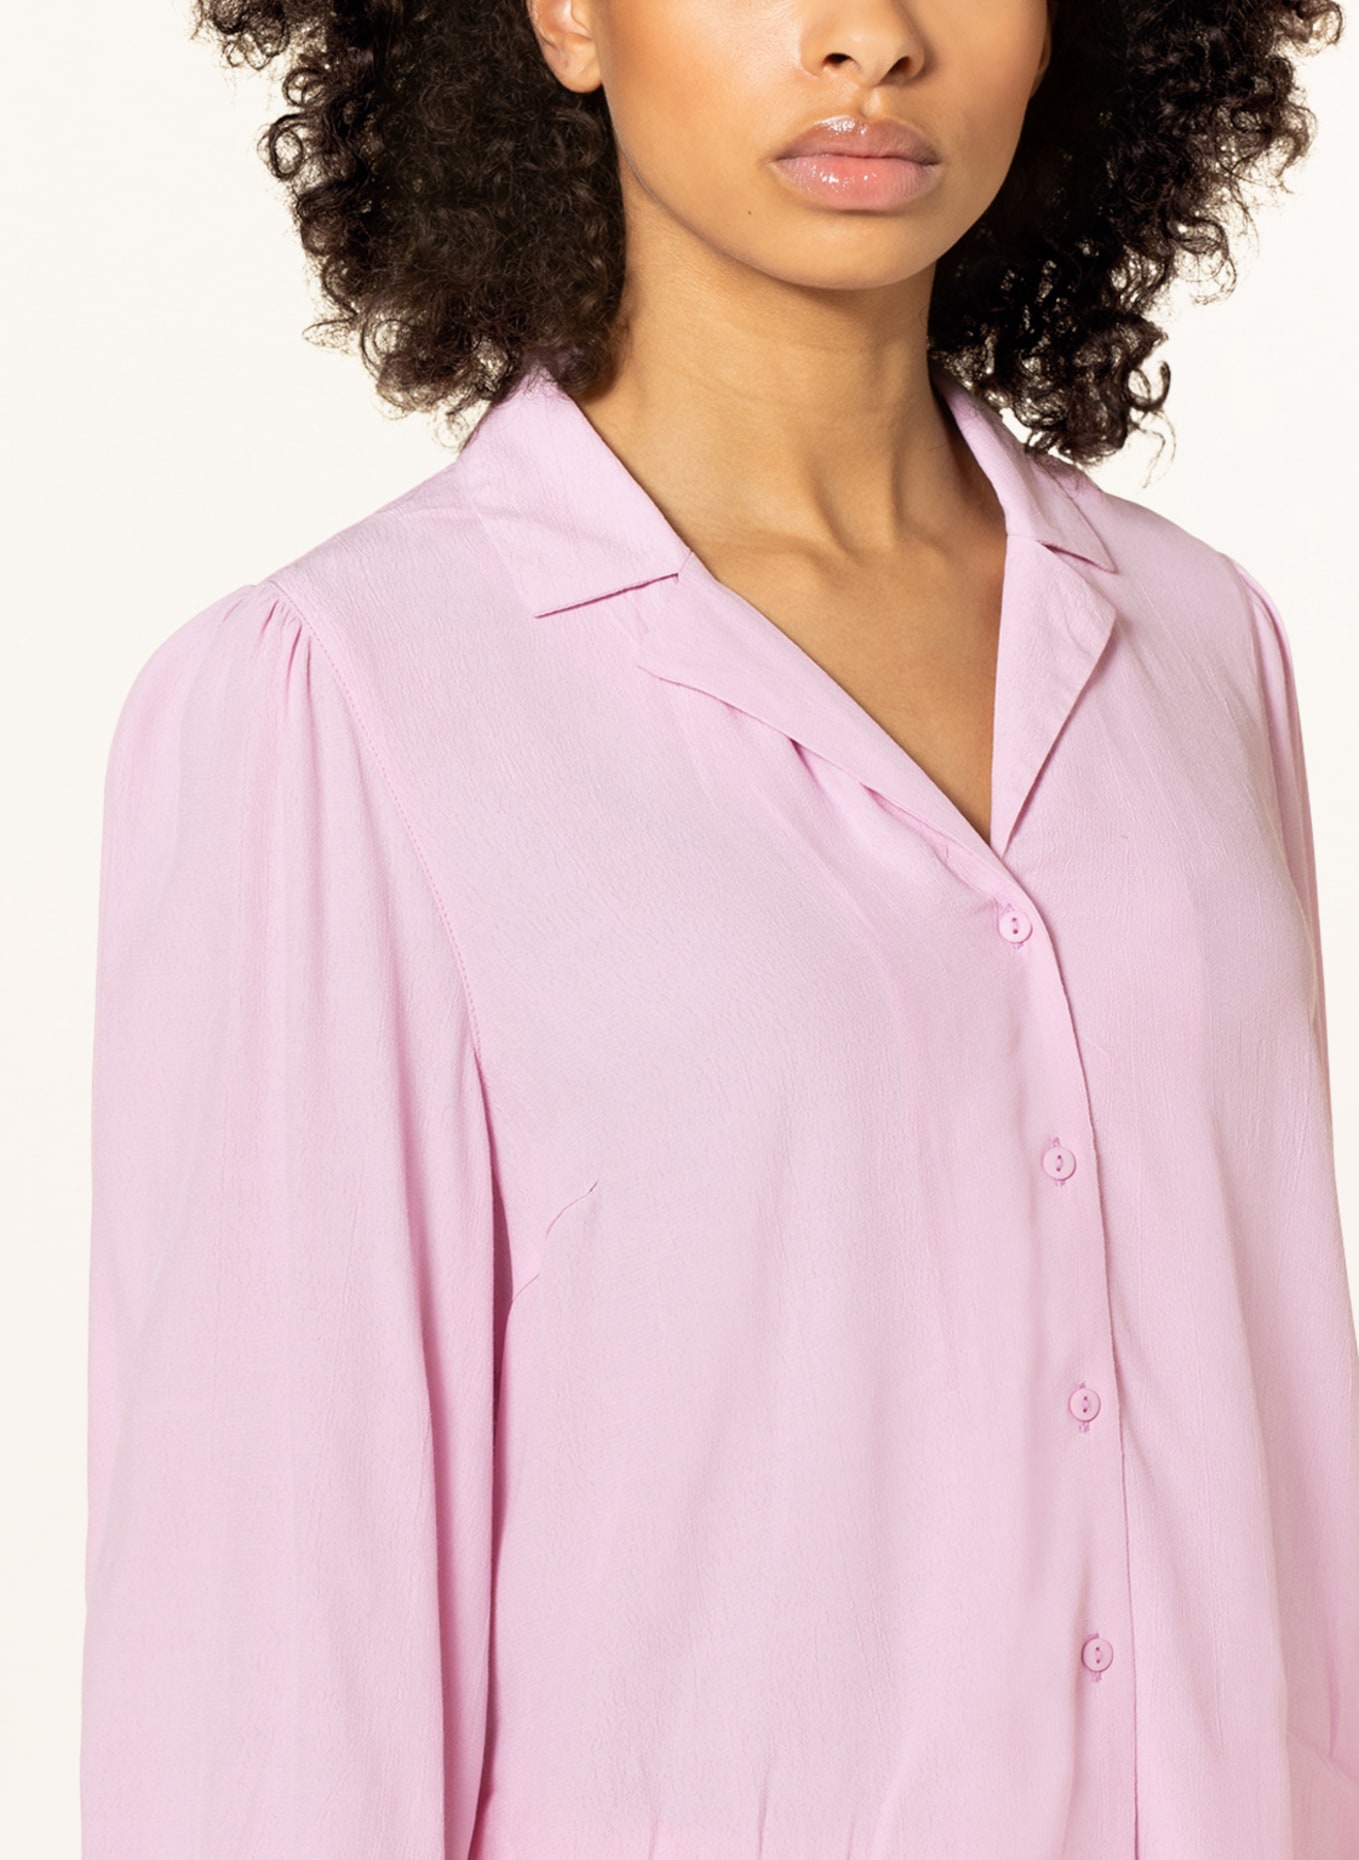 MSCH COPENHAGEN Blouse GALLIENA with 3/4 sleeves, Color: PINK (Image 4)